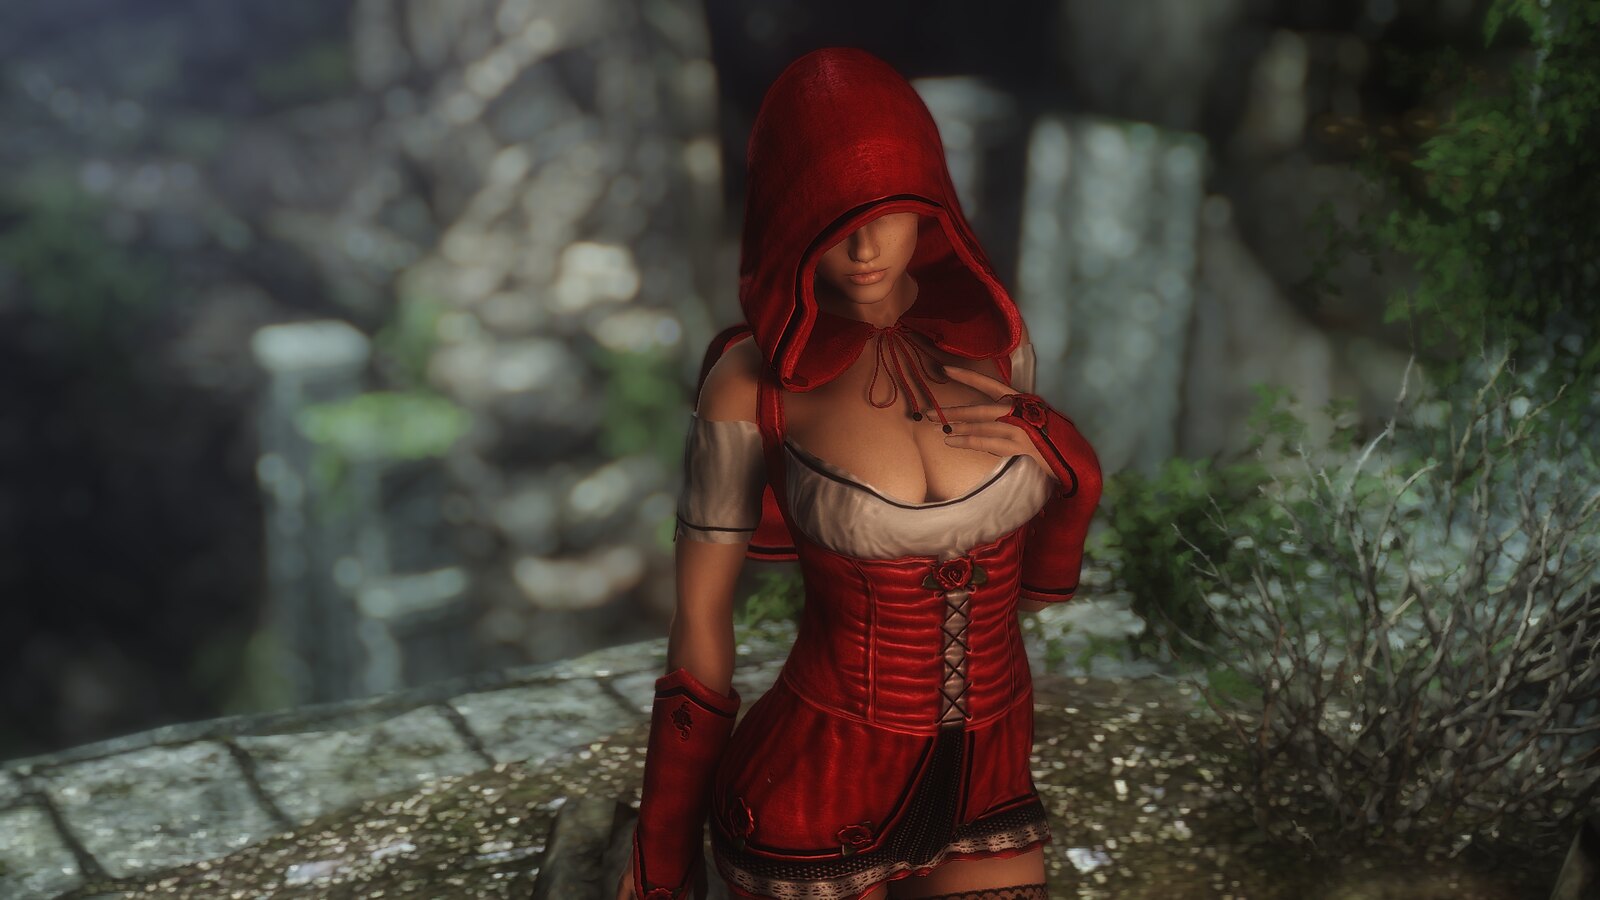 amelia hines recommends red riding hood skyrim pic